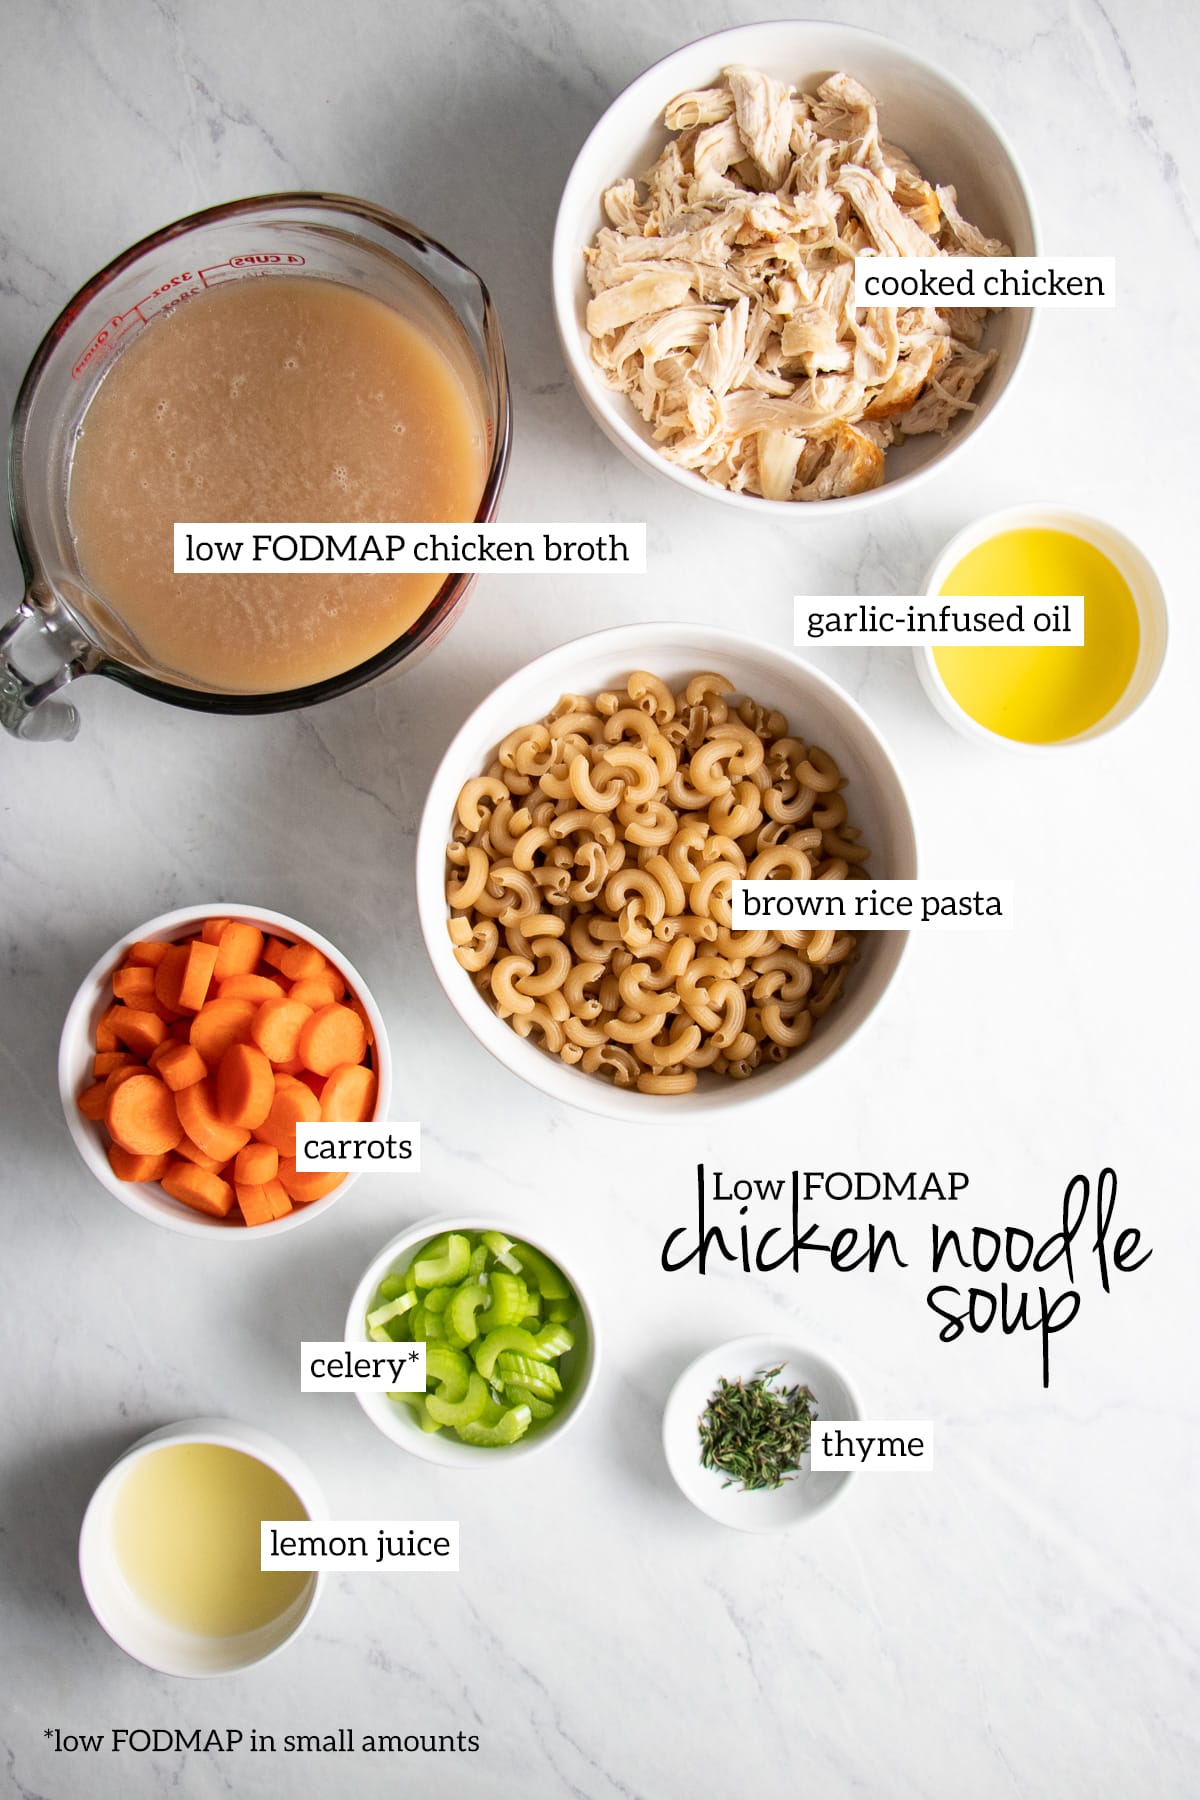 The ingredients needed for this chicken noodle soup are measured out into separate bowls for display.